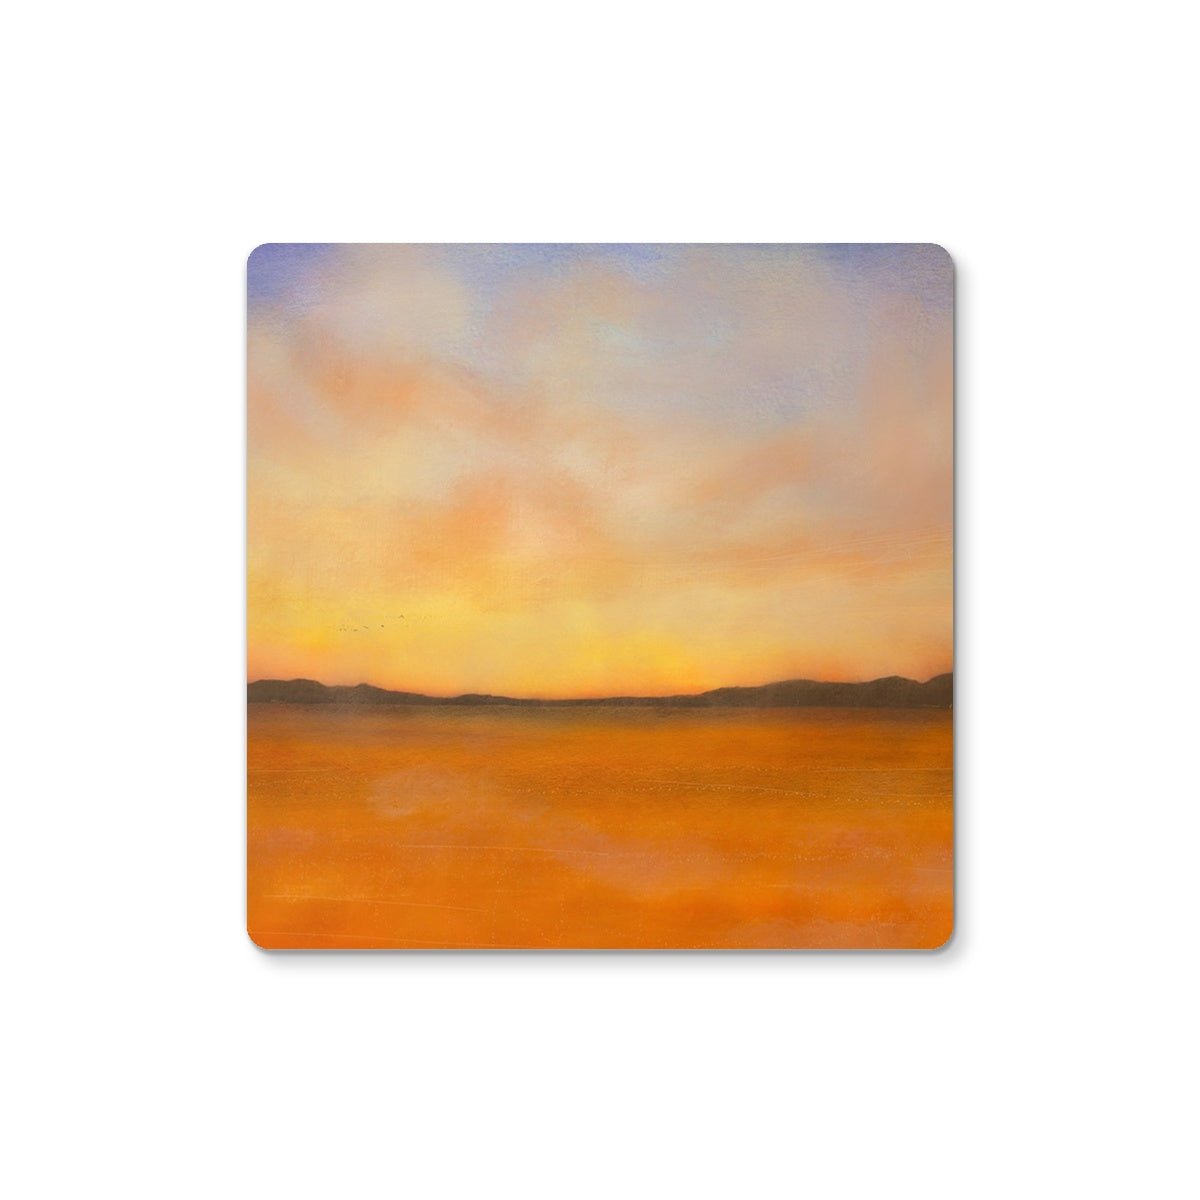 Islay Dawn Art Gifts Coaster-Coasters-Hebridean Islands Art Gallery-4 Coasters-Paintings, Prints, Homeware, Art Gifts From Scotland By Scottish Artist Kevin Hunter